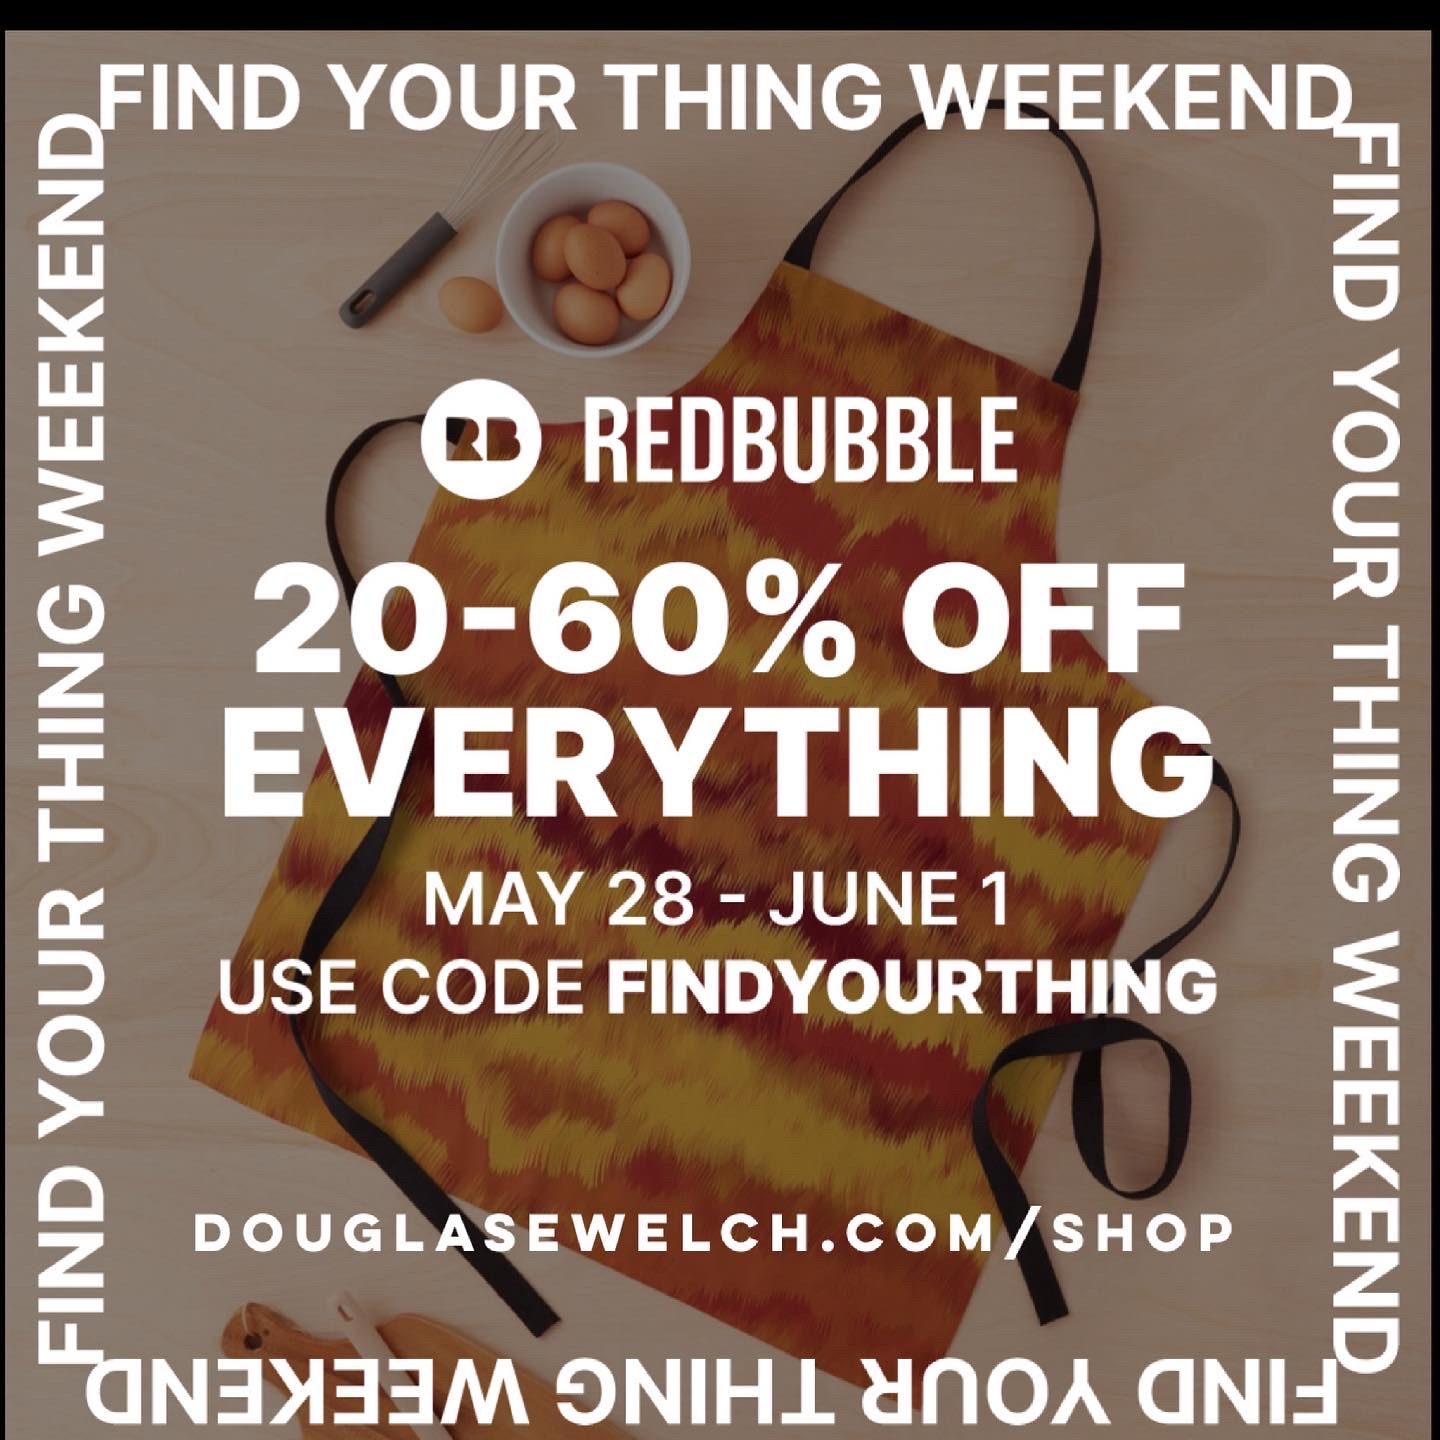 On Sale – Check out all of m my photography and vintage designs! – FIND YOUR THING WEEKEND – 20-60% off everything  – May 28 – June 1